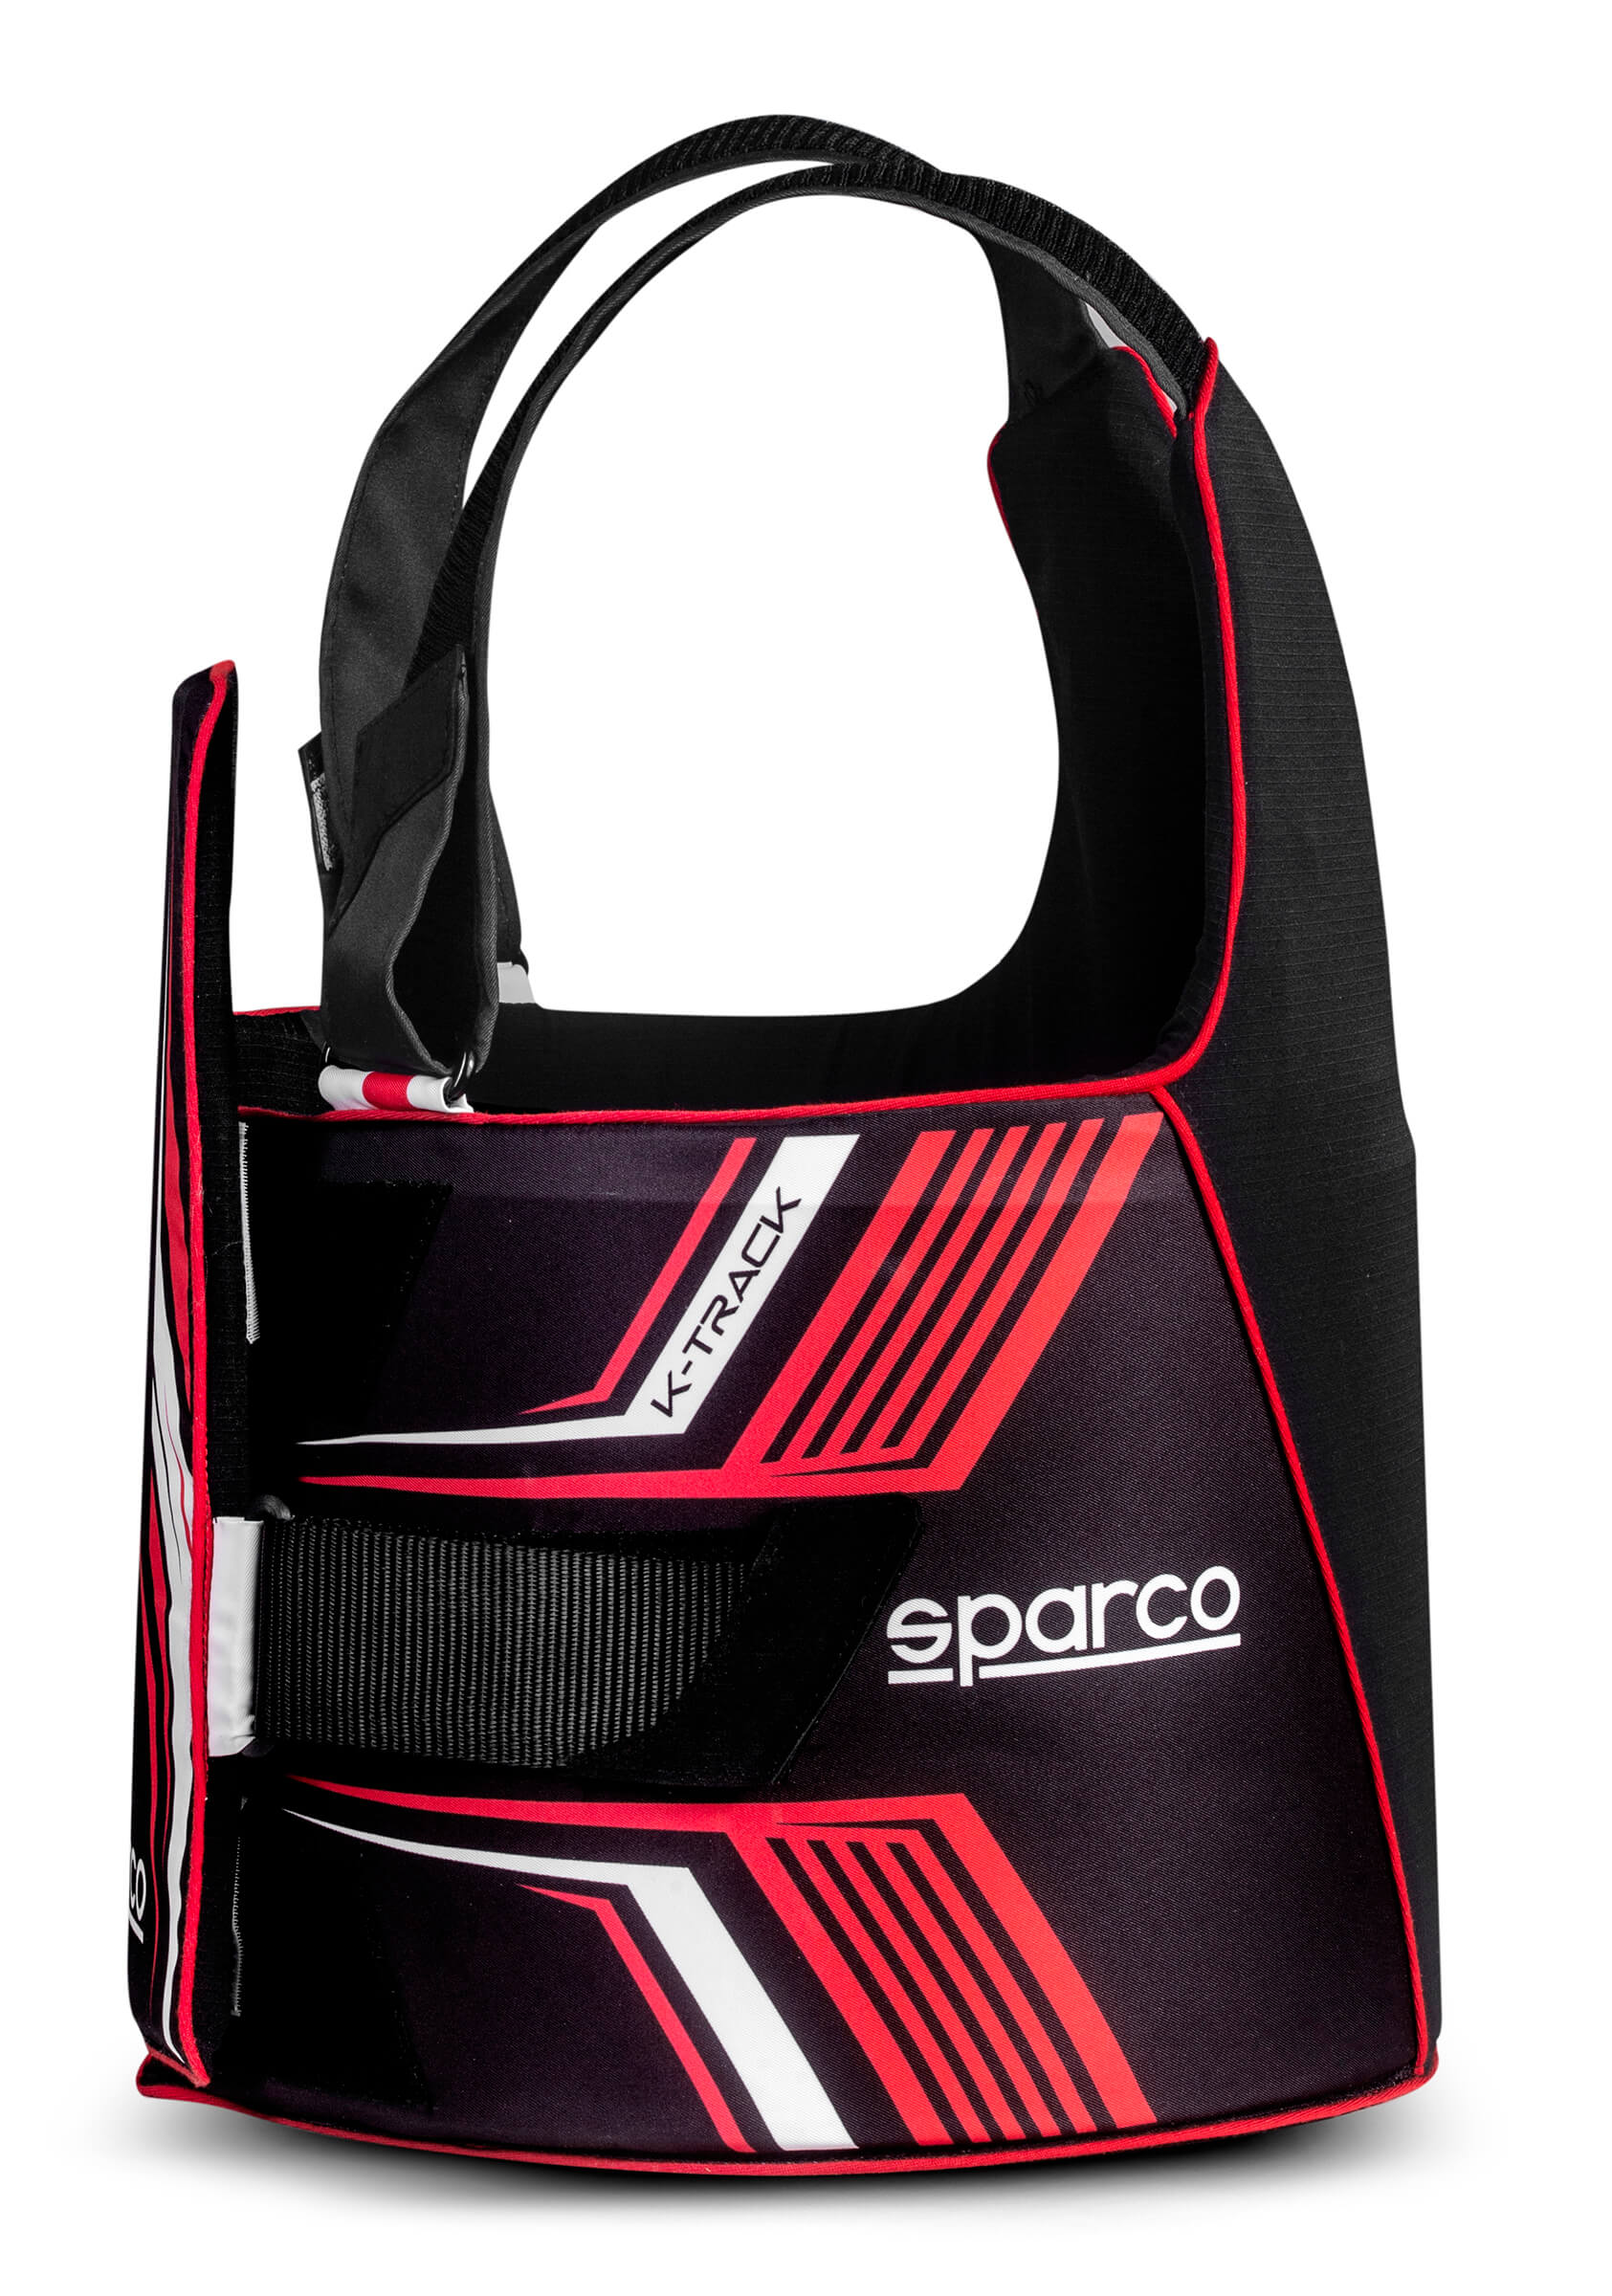 SPARCO 002406KNRRS2S K-TRACK Karting Rib Protector, FIA 8870-2018, black/red, size S Photo-1 